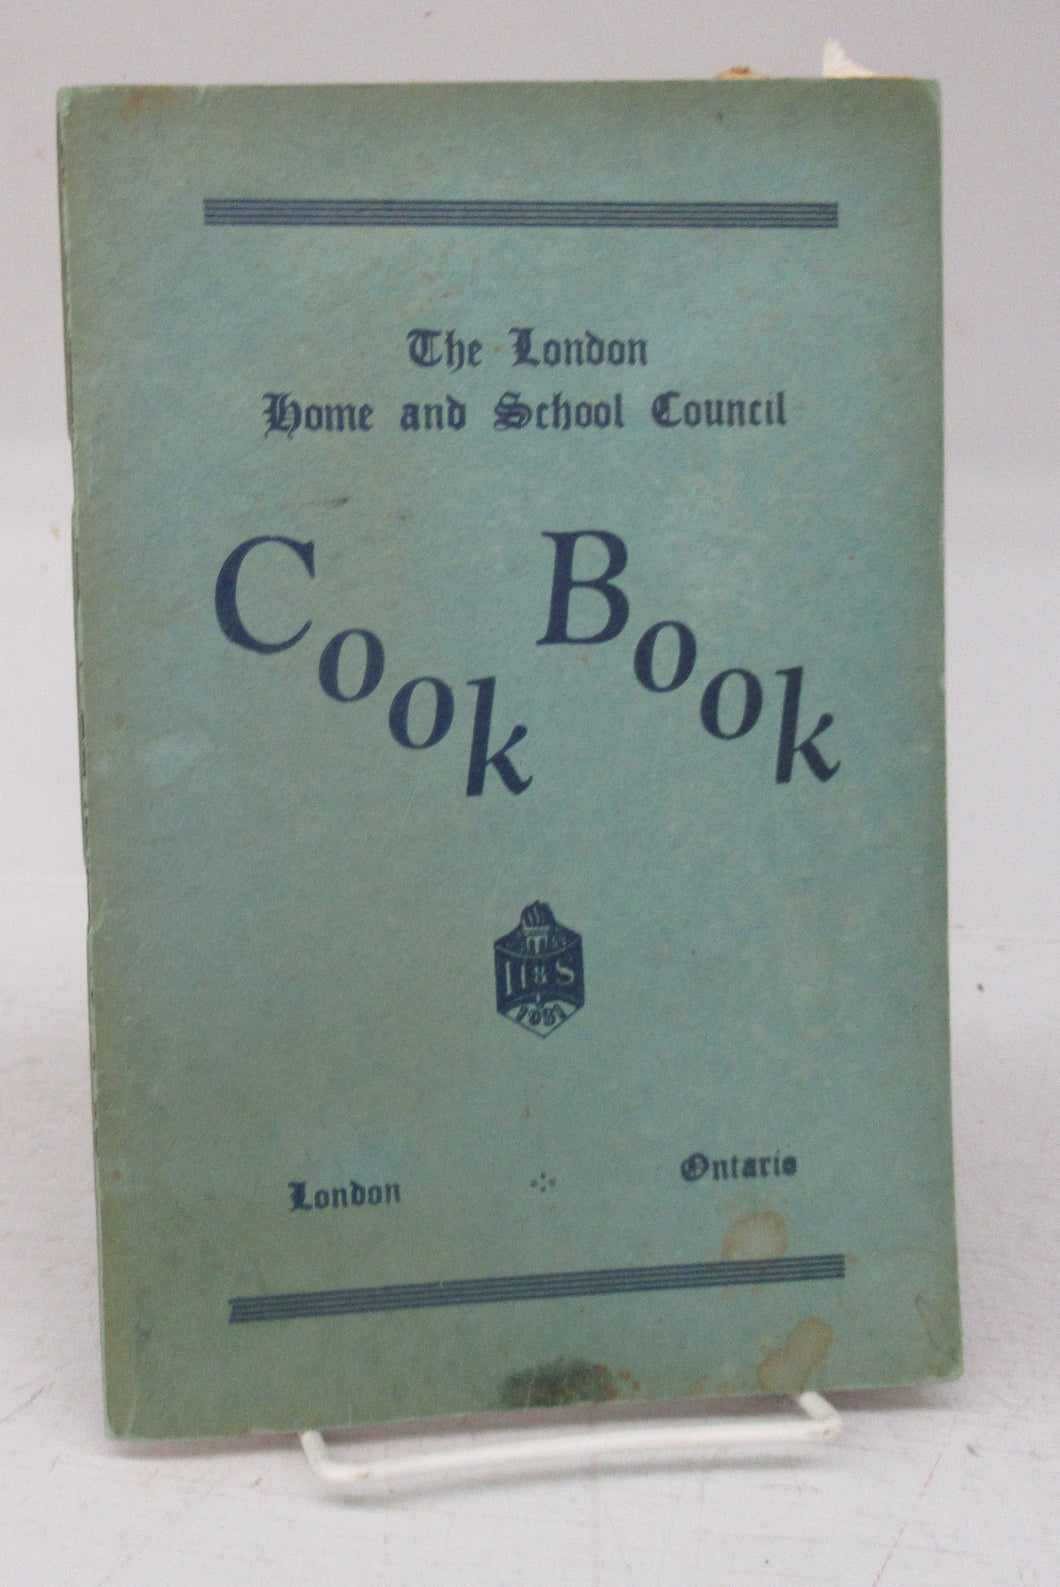 The London Home and School Council Cook Book